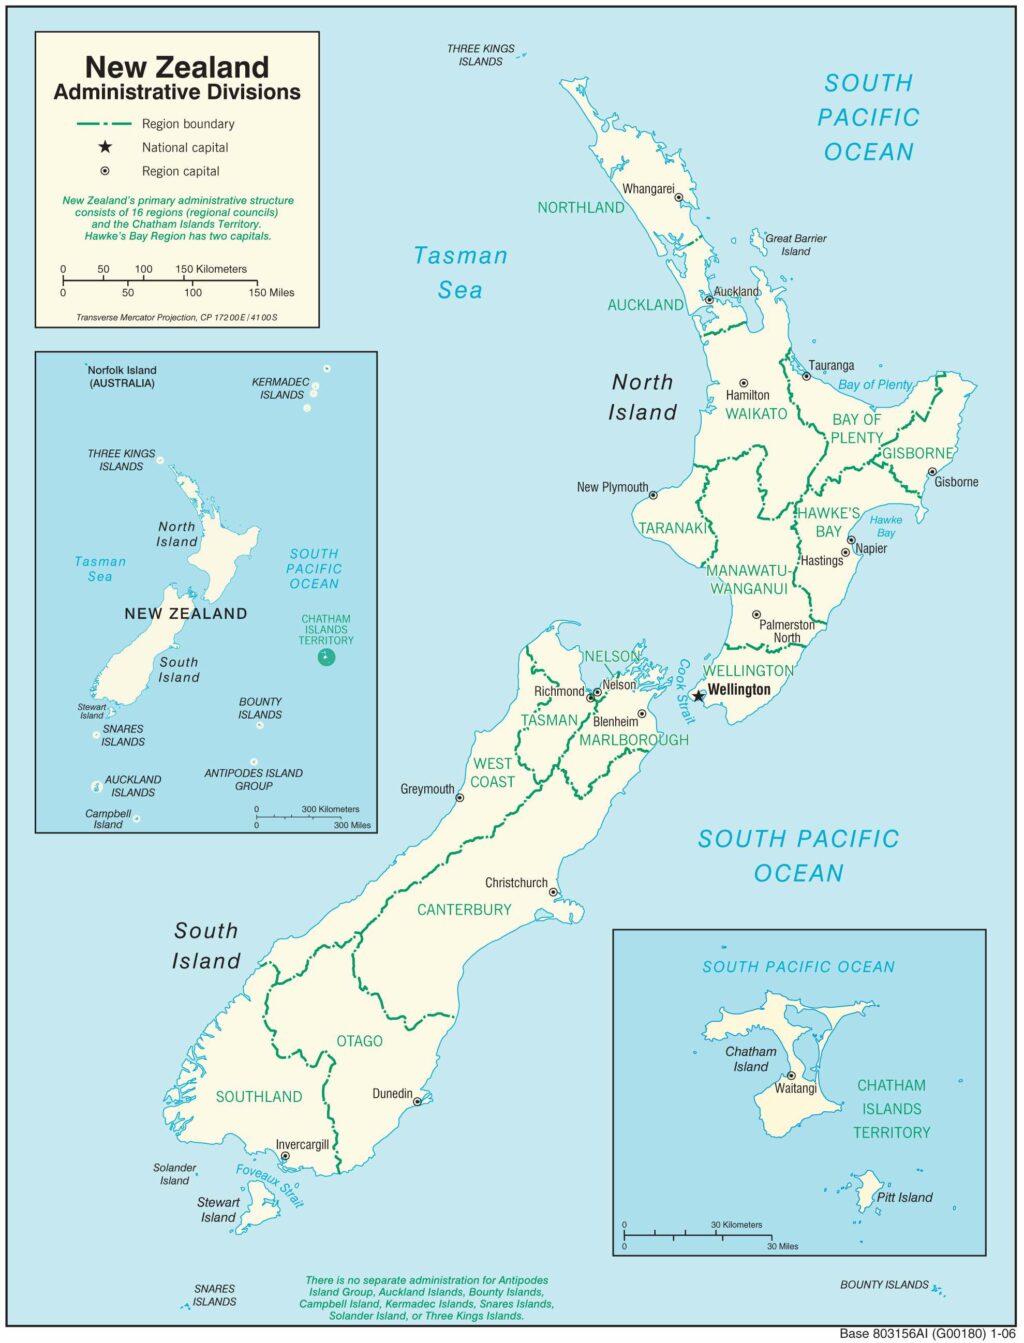 New Zealand administrative map.